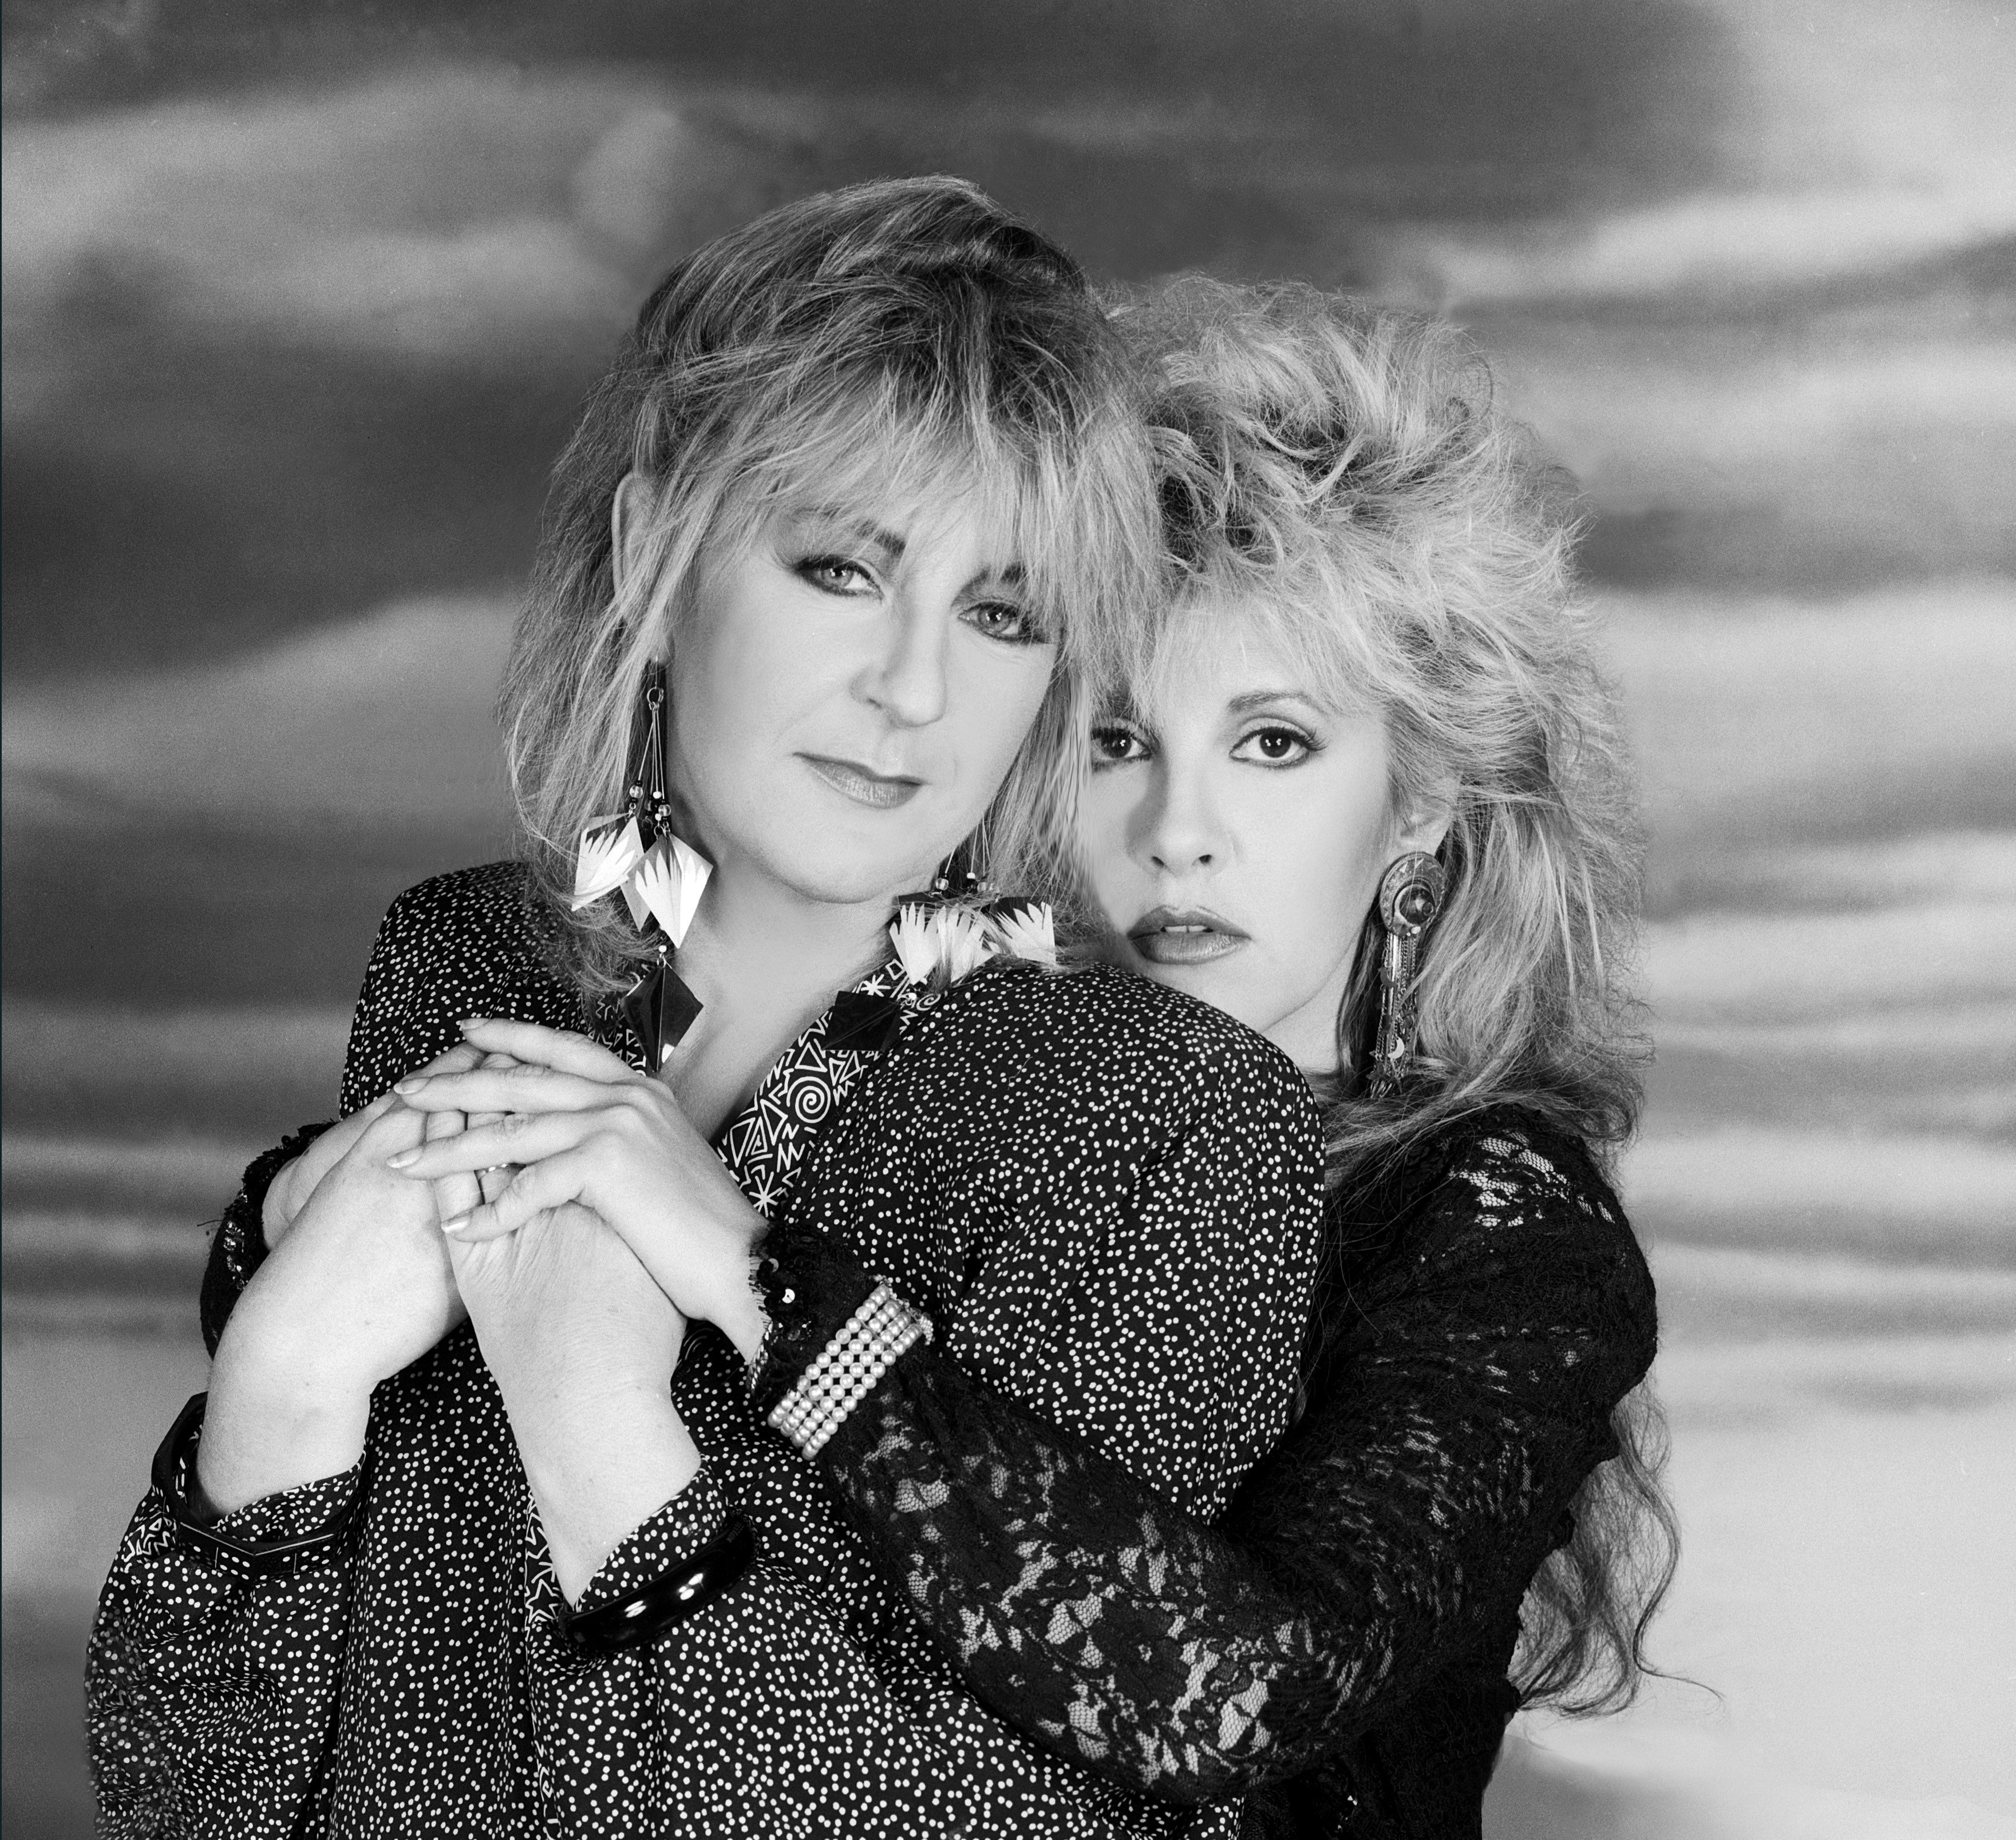 A black and white photo of Stevie Nicks standing behind Christine McVie and embracing her.